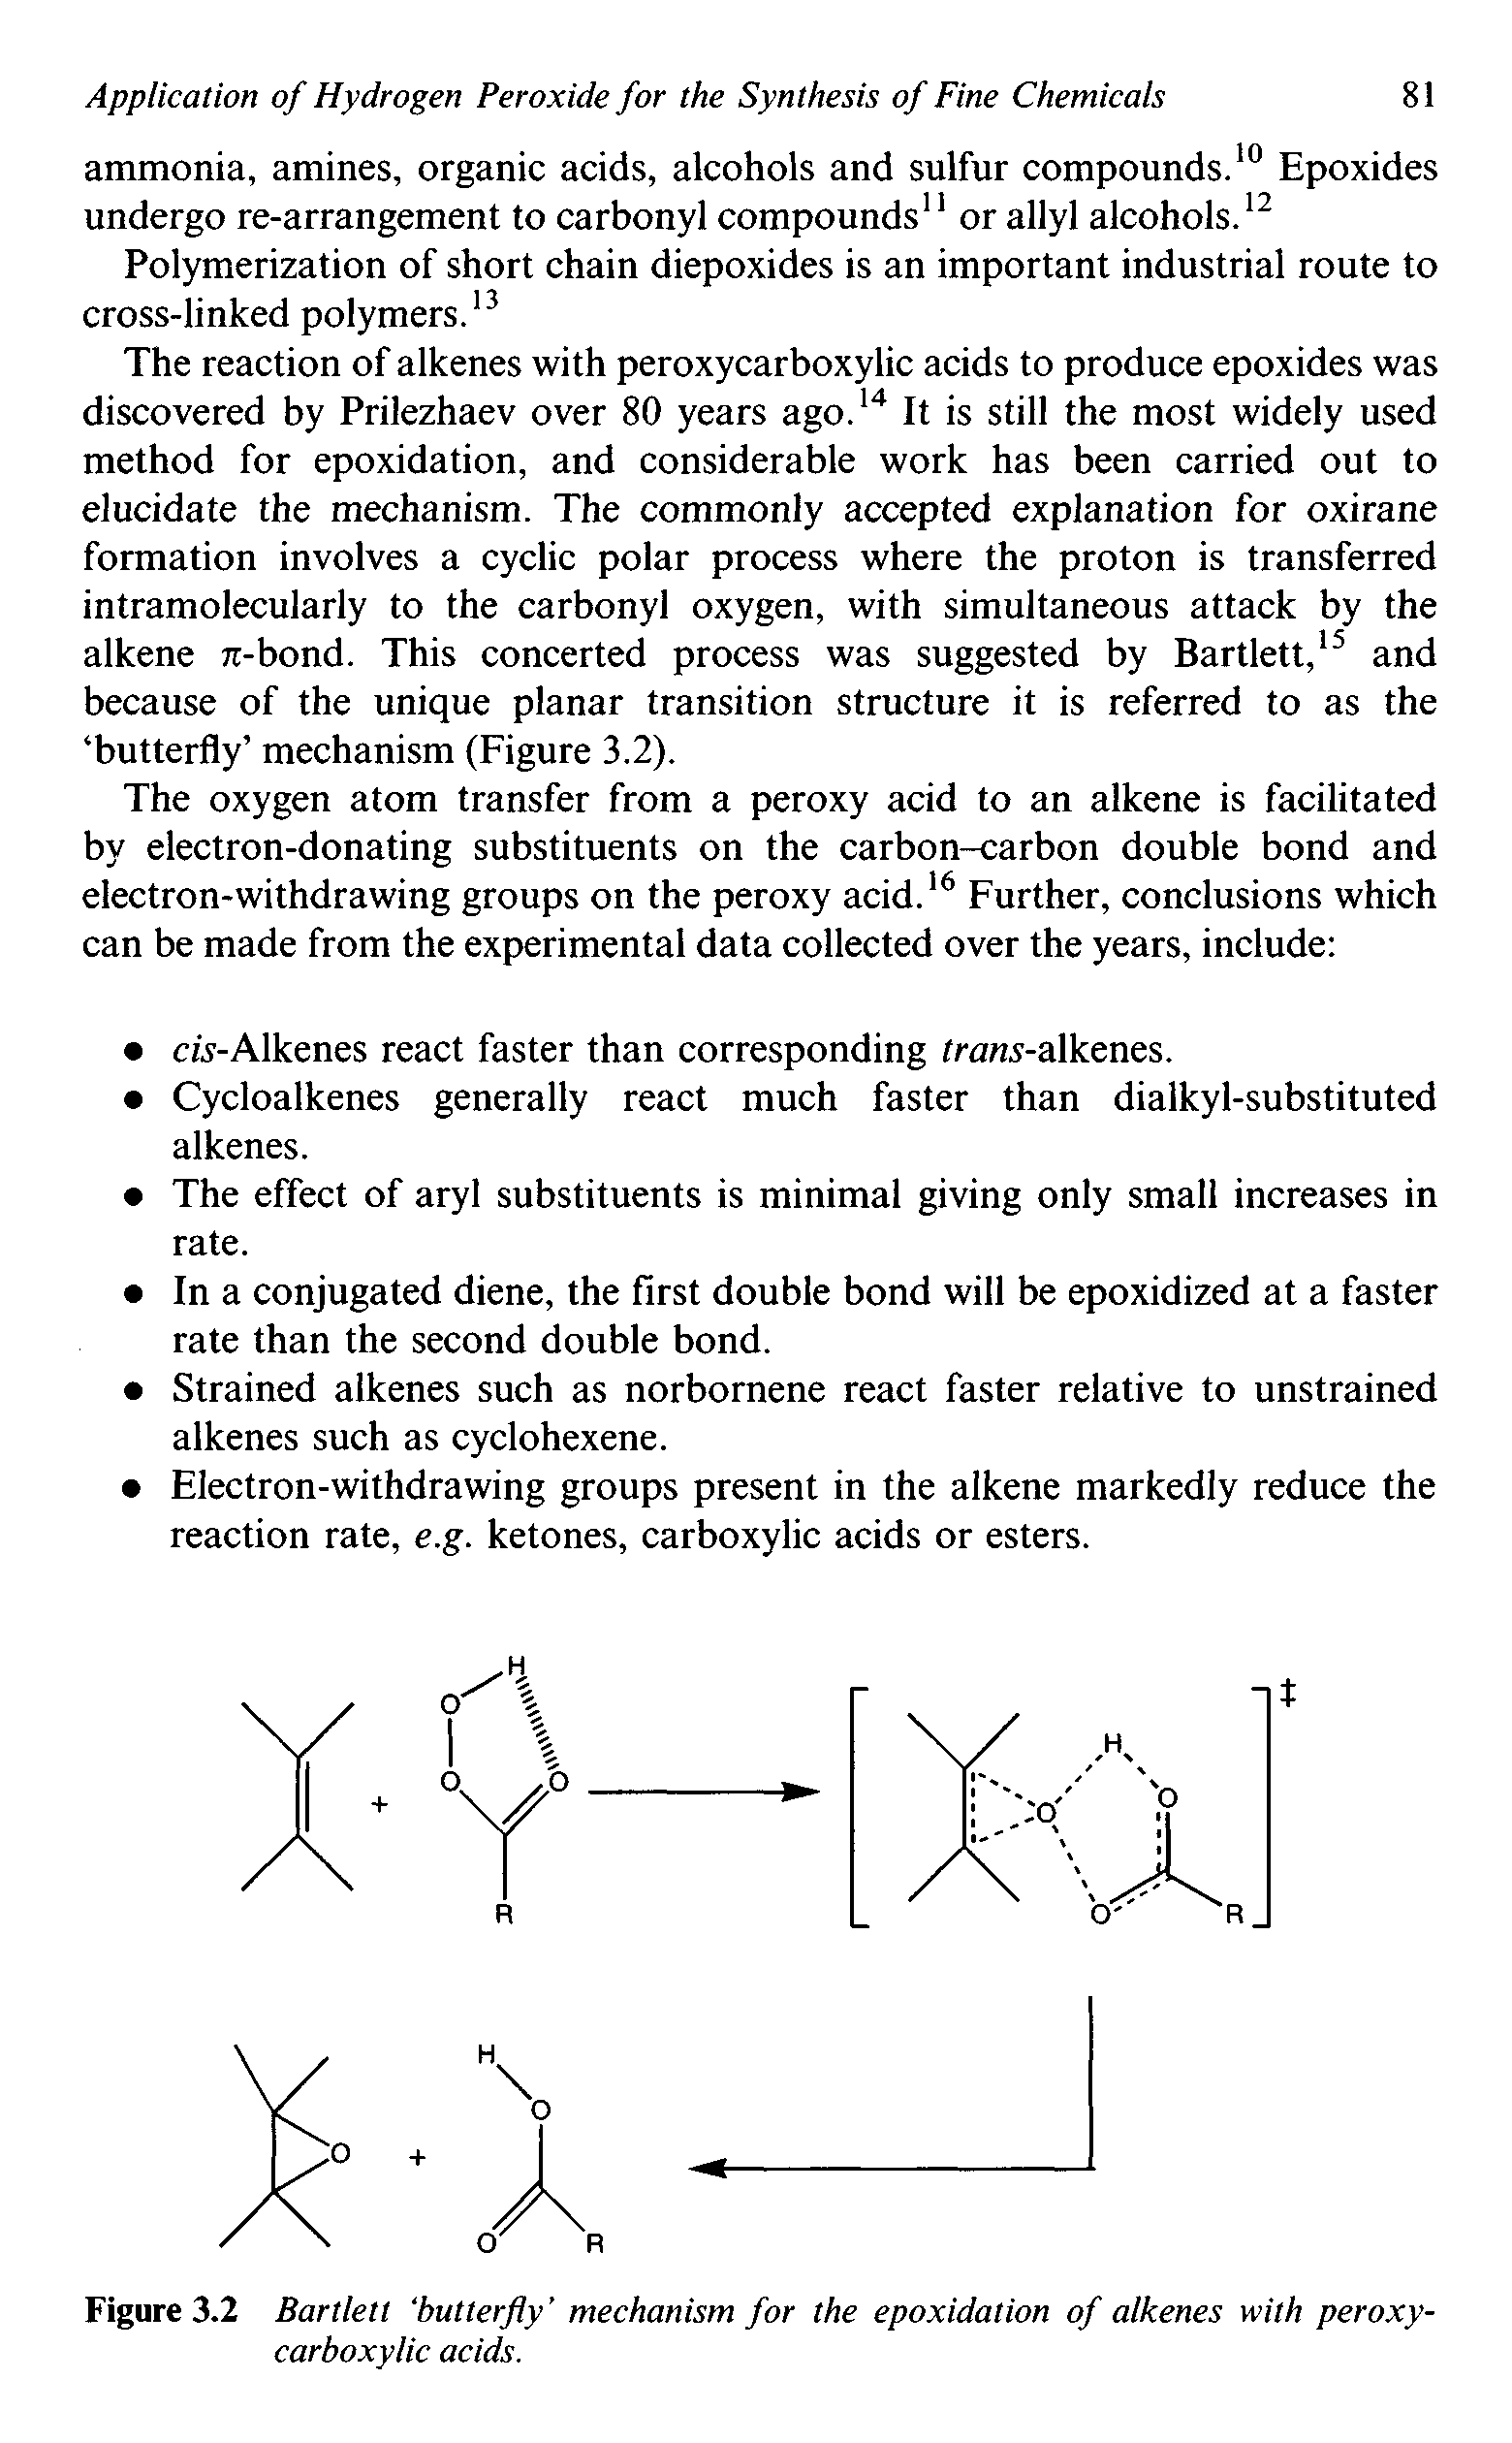 Figure 3.2 Bartlett butterfly mechanism for the epoxidation of alkenes with peroxycarboxylic acids.